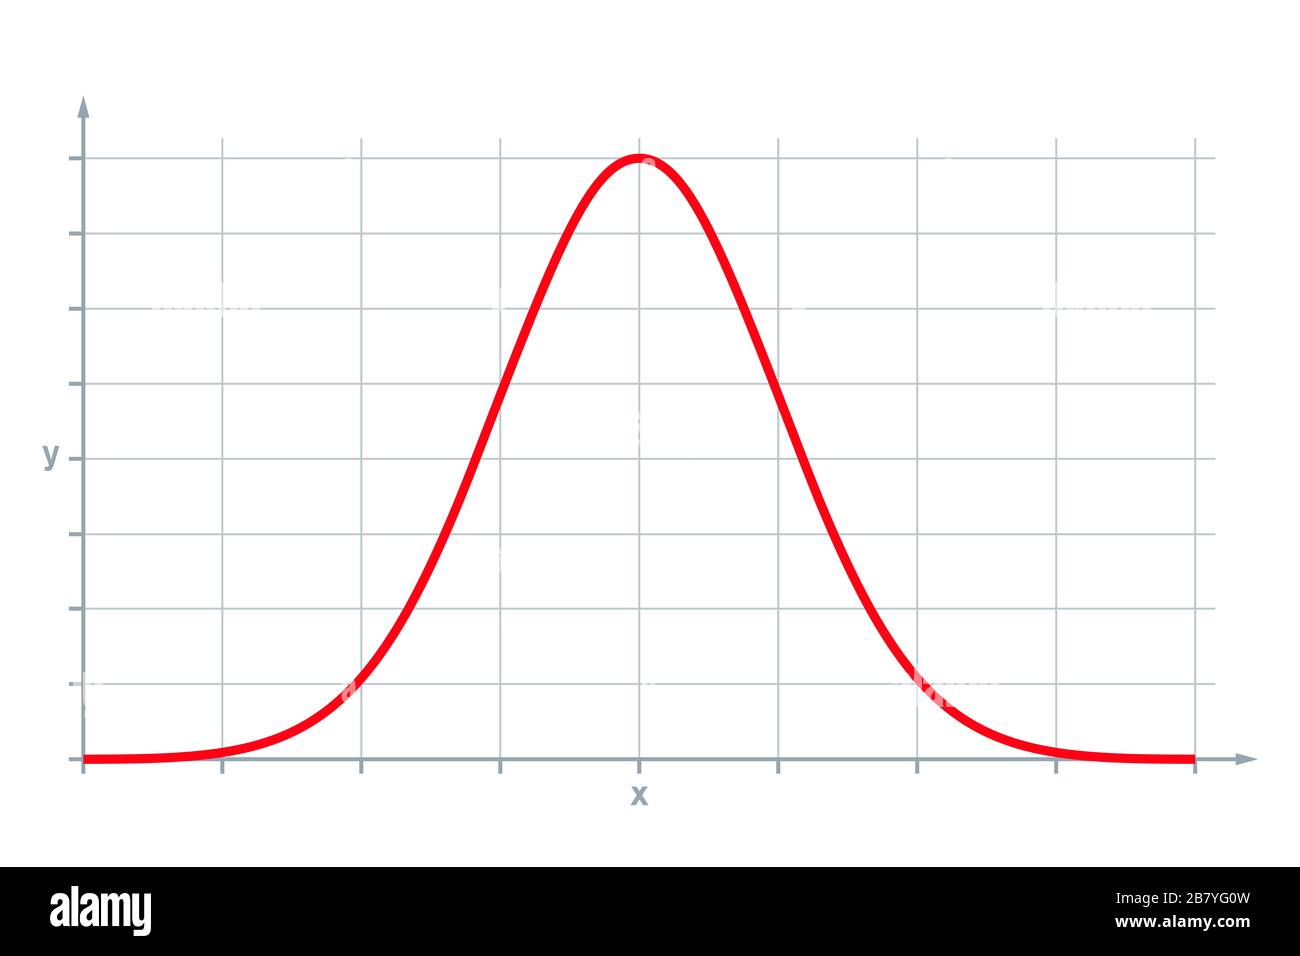 Bell Curve Definition: Normal Distribution Meaning Example in Finance